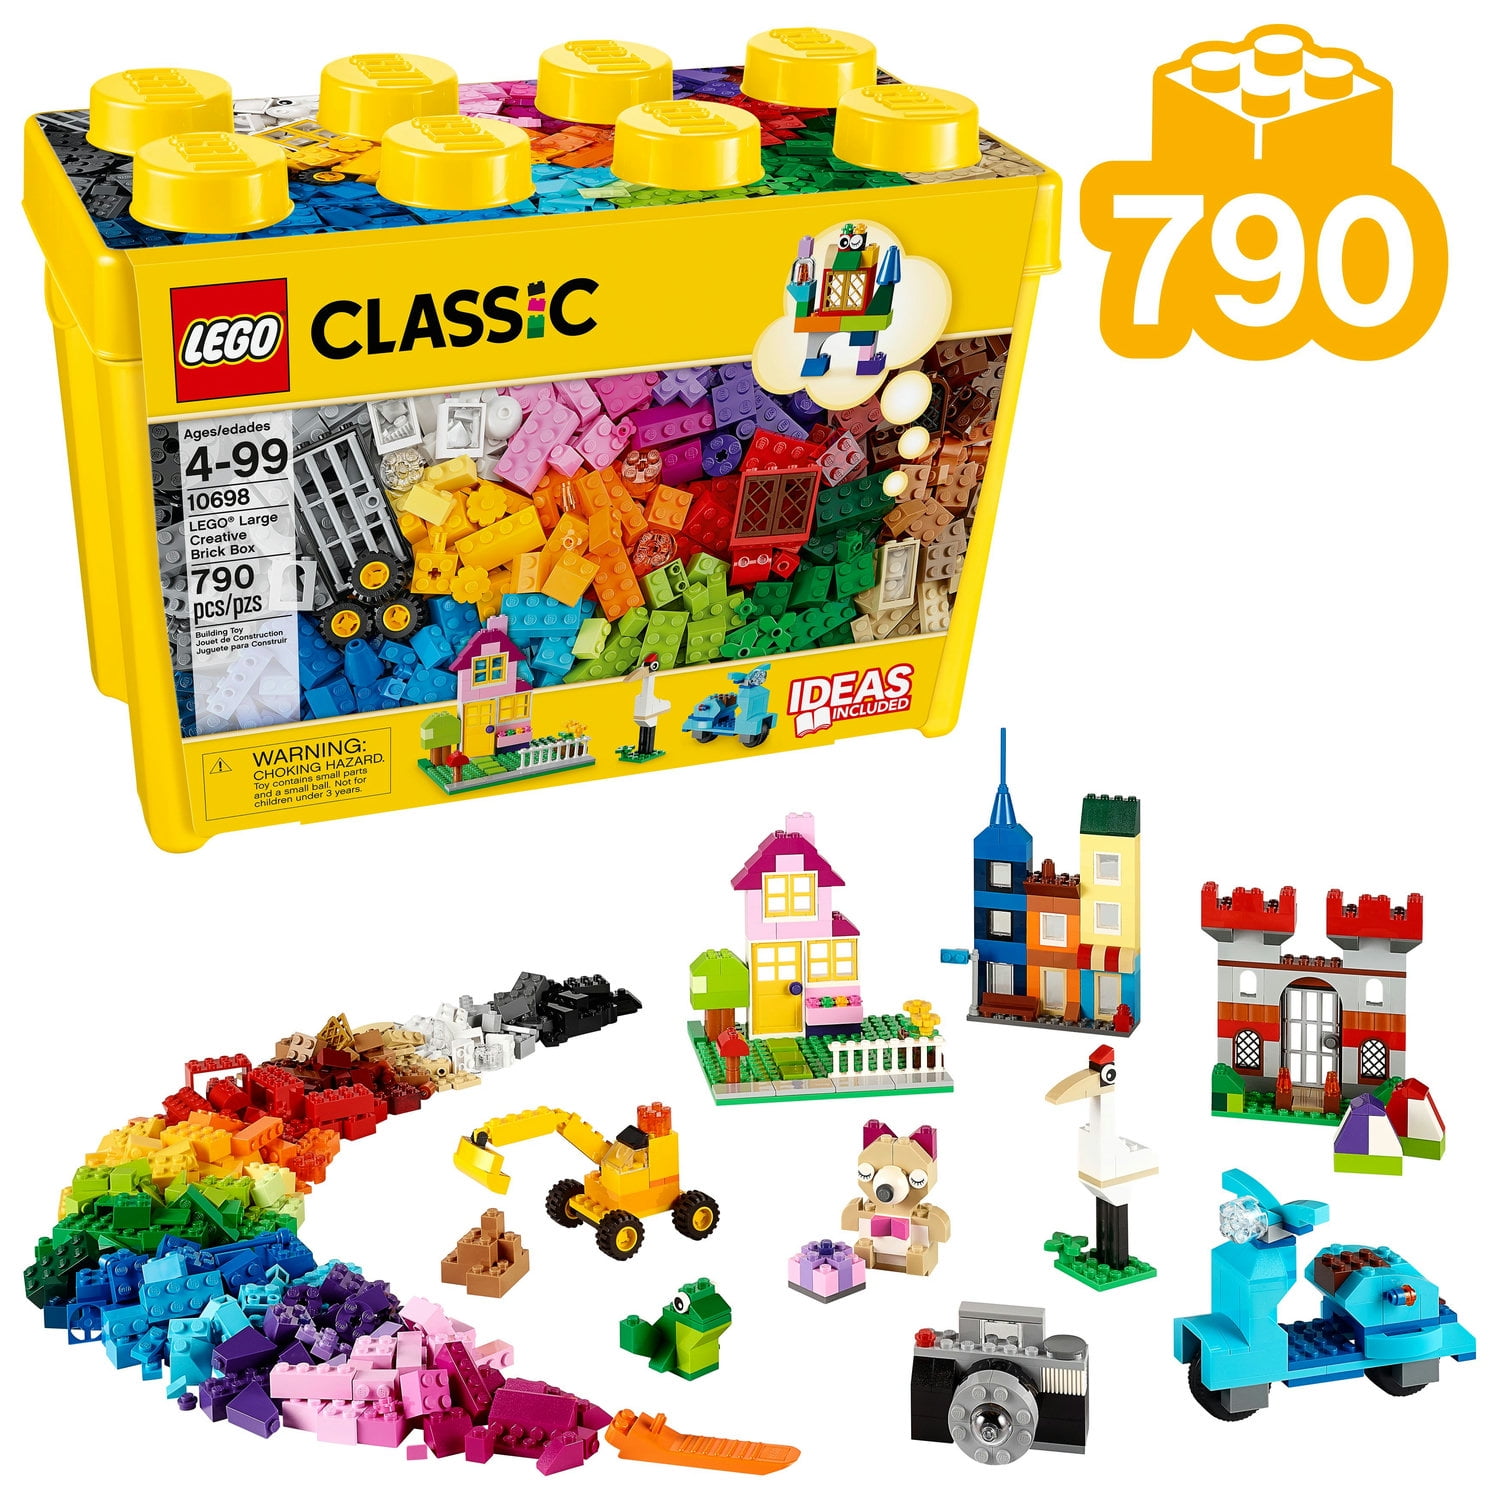 LEGO Duplo My First Bricks 10848 Colorful Toys Building Kit for Toddler Play and 